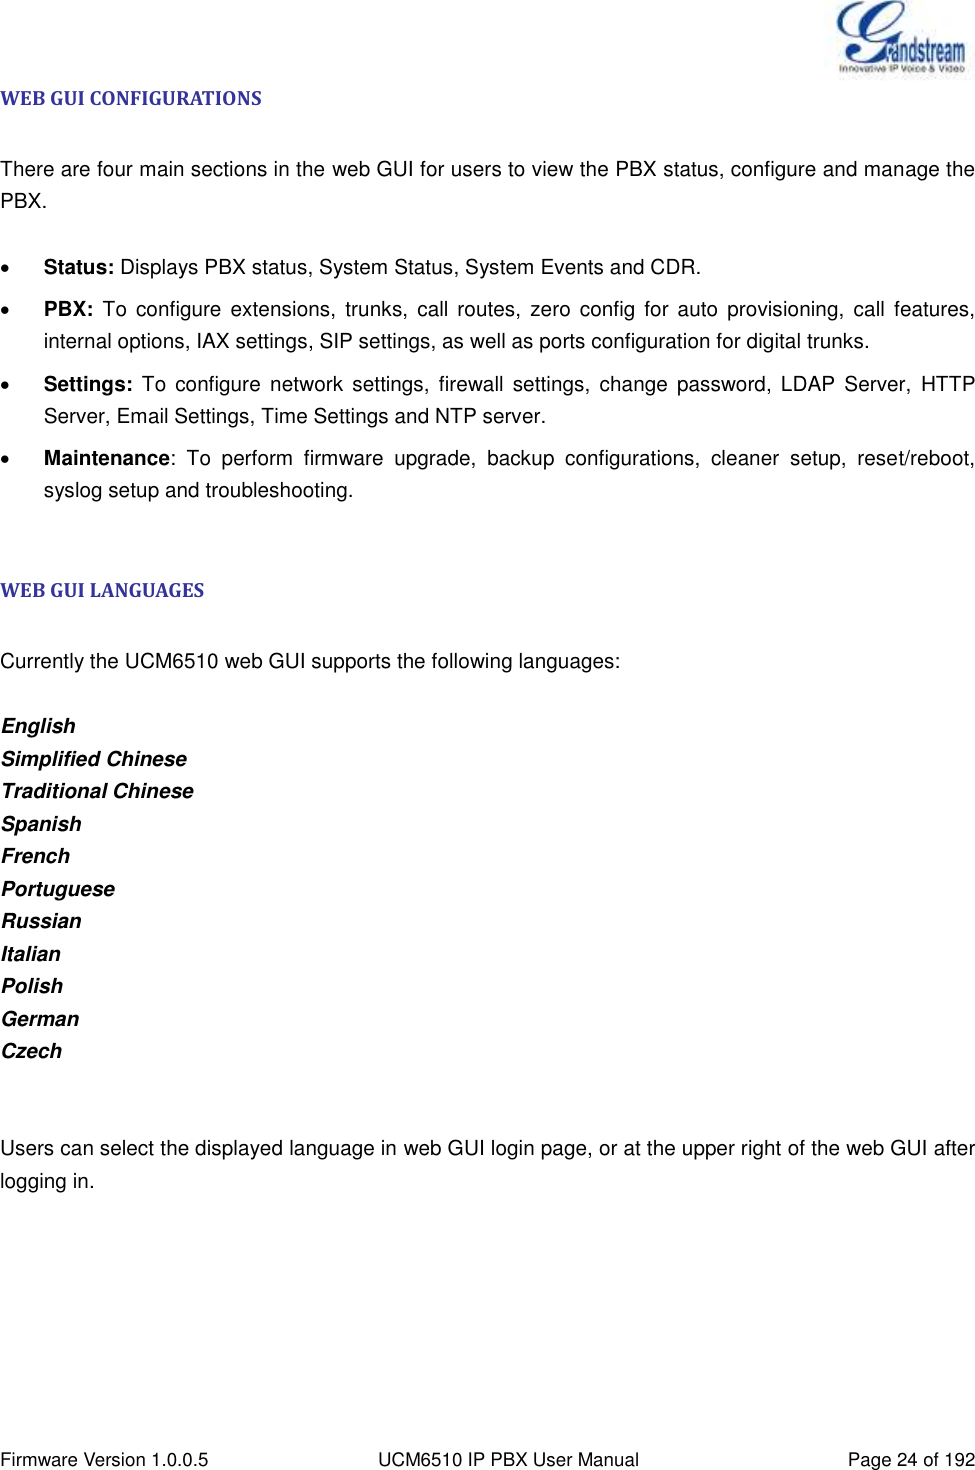  Firmware Version 1.0.0.5 UCM6510 IP PBX User Manual Page 24 of 192  WEB GUI CONFIGURATIONS  There are four main sections in the web GUI for users to view the PBX status, configure and manage the PBX.   Status: Displays PBX status, System Status, System Events and CDR.  PBX: To configure  extensions,  trunks,  call routes,  zero  config  for  auto  provisioning,  call  features, internal options, IAX settings, SIP settings, as well as ports configuration for digital trunks.  Settings:  To  configure  network  settings,  firewall  settings,  change  password, LDAP  Server,  HTTP Server, Email Settings, Time Settings and NTP server.  Maintenance:  To  perform  firmware  upgrade,  backup  configurations,  cleaner  setup,  reset/reboot, syslog setup and troubleshooting.  WEB GUI LANGUAGES  Currently the UCM6510 web GUI supports the following languages:  English Simplified Chinese Traditional Chinese Spanish French Portuguese Russian Italian Polish German Czech   Users can select the displayed language in web GUI login page, or at the upper right of the web GUI after logging in.  